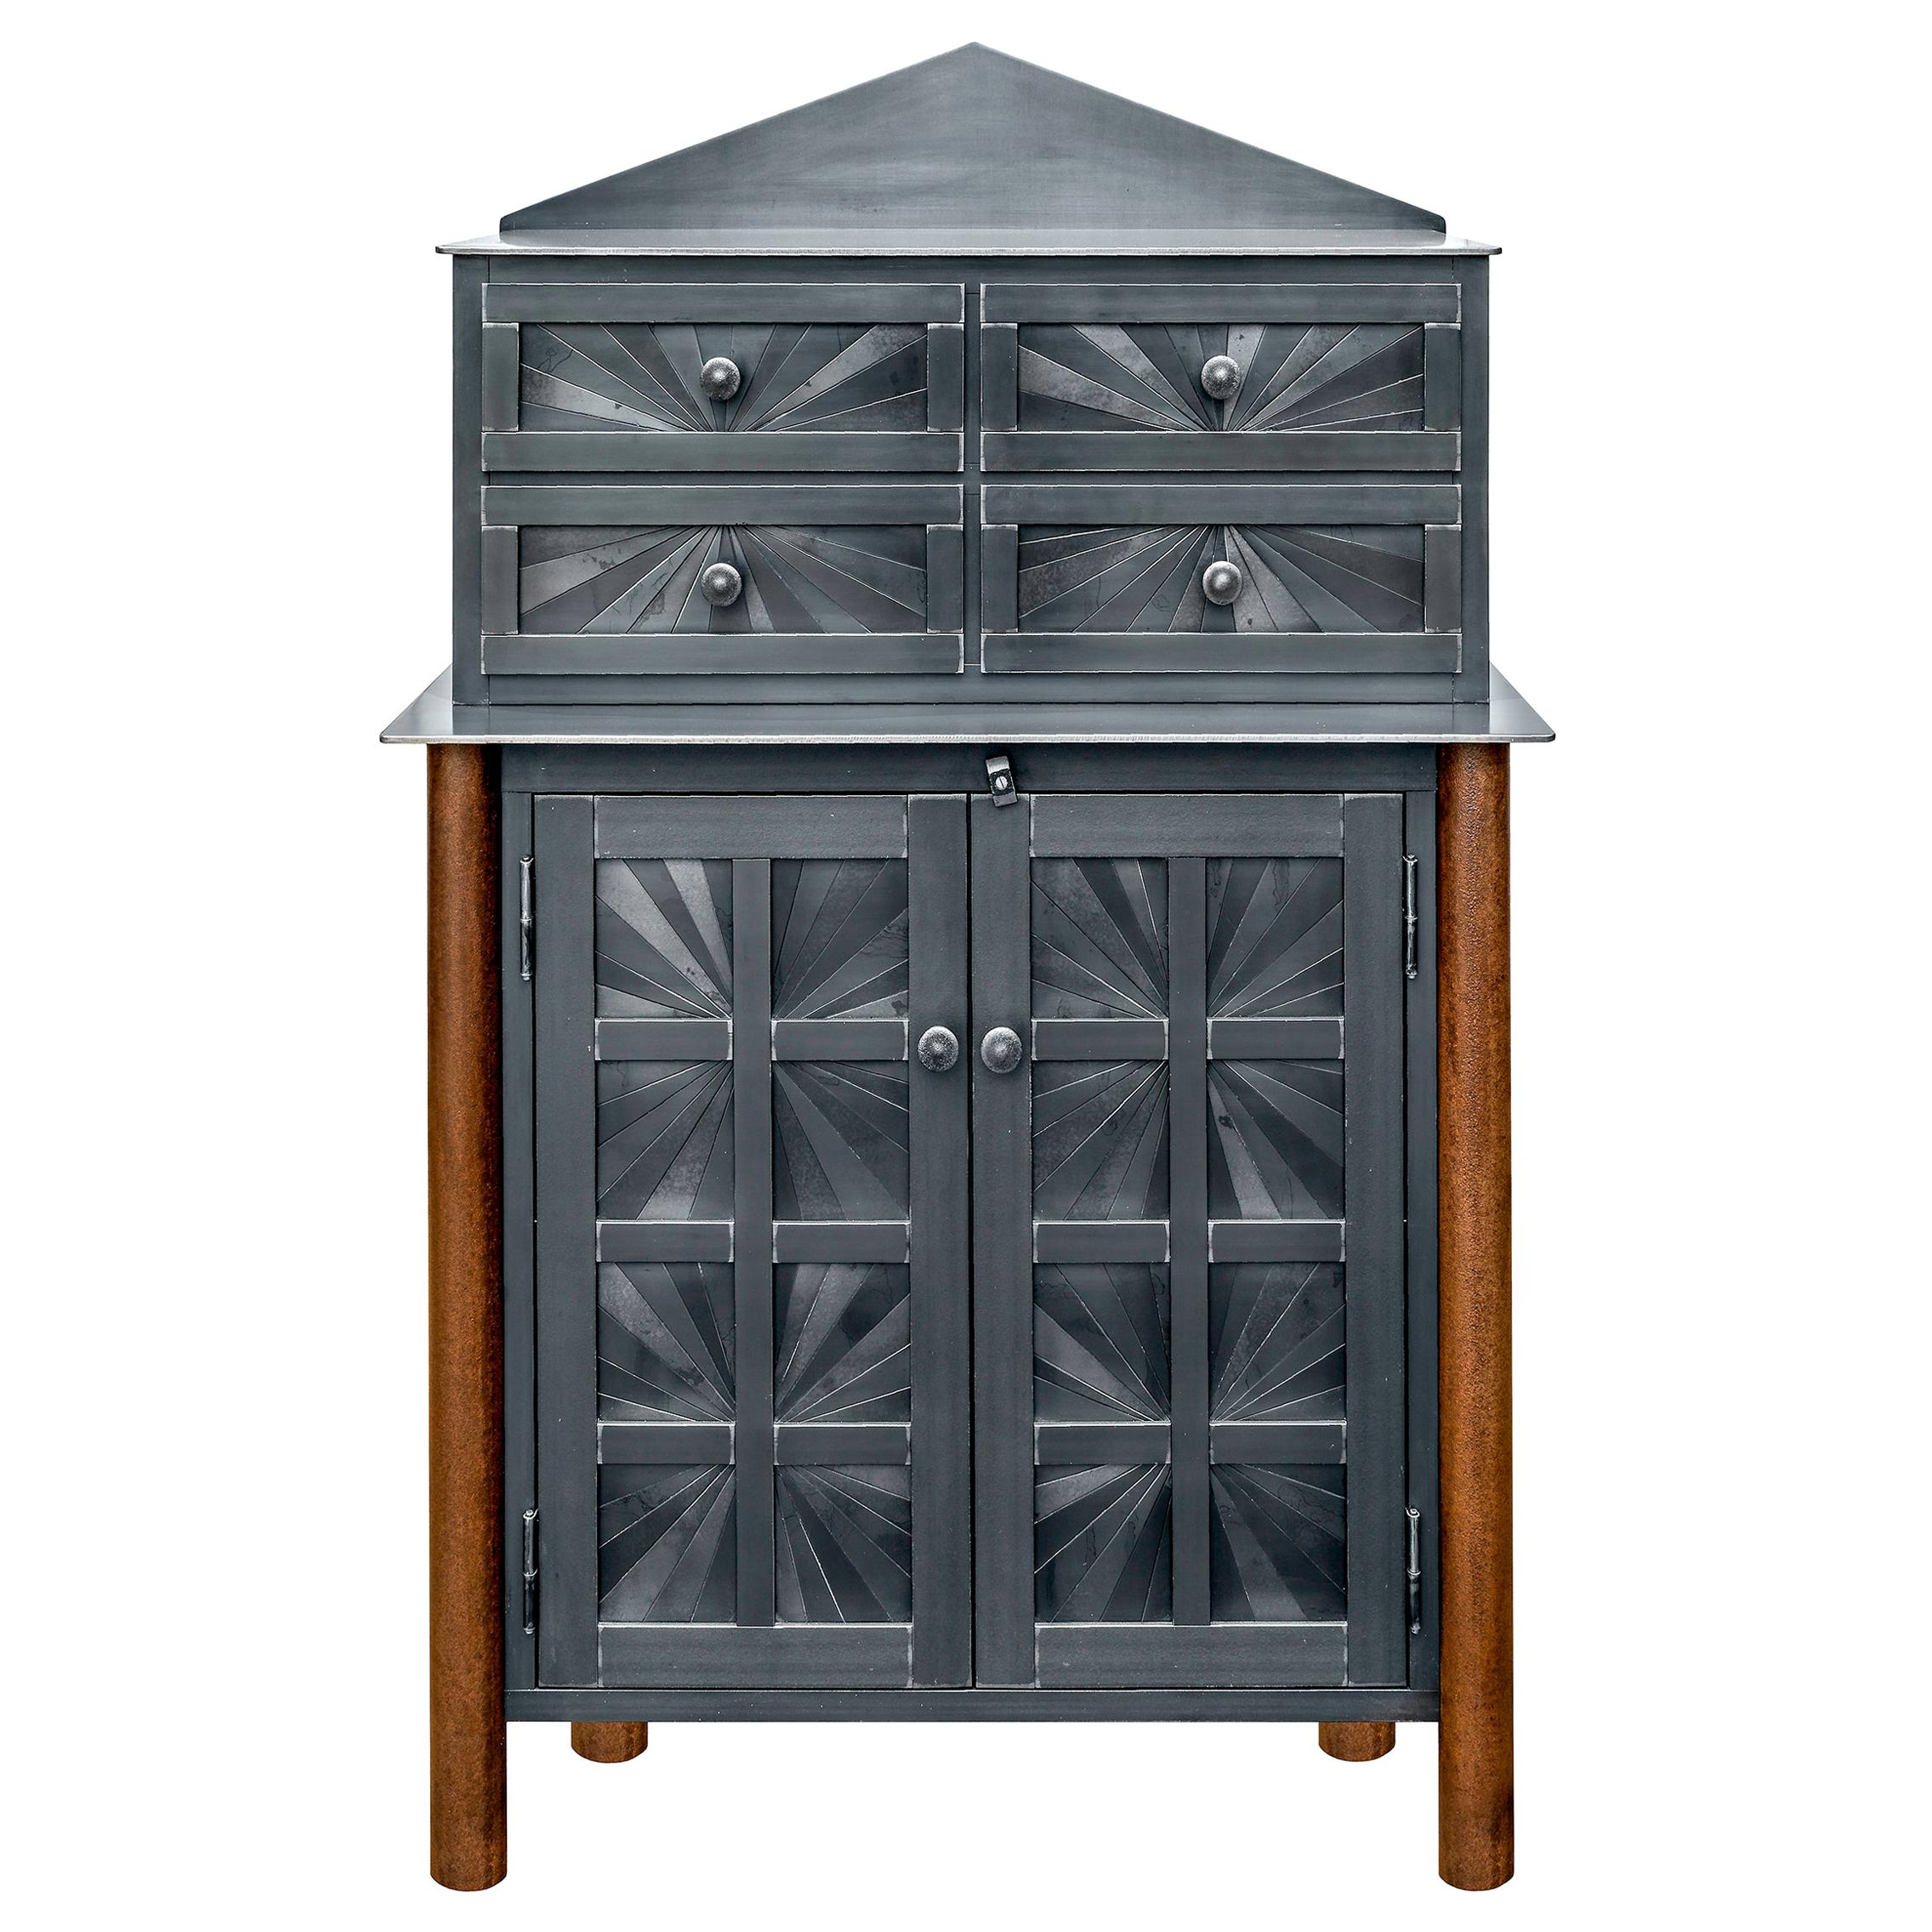 Jim Rose Starburst Pattern Cupboard with Chest of Drawers, Steel Art Furniture